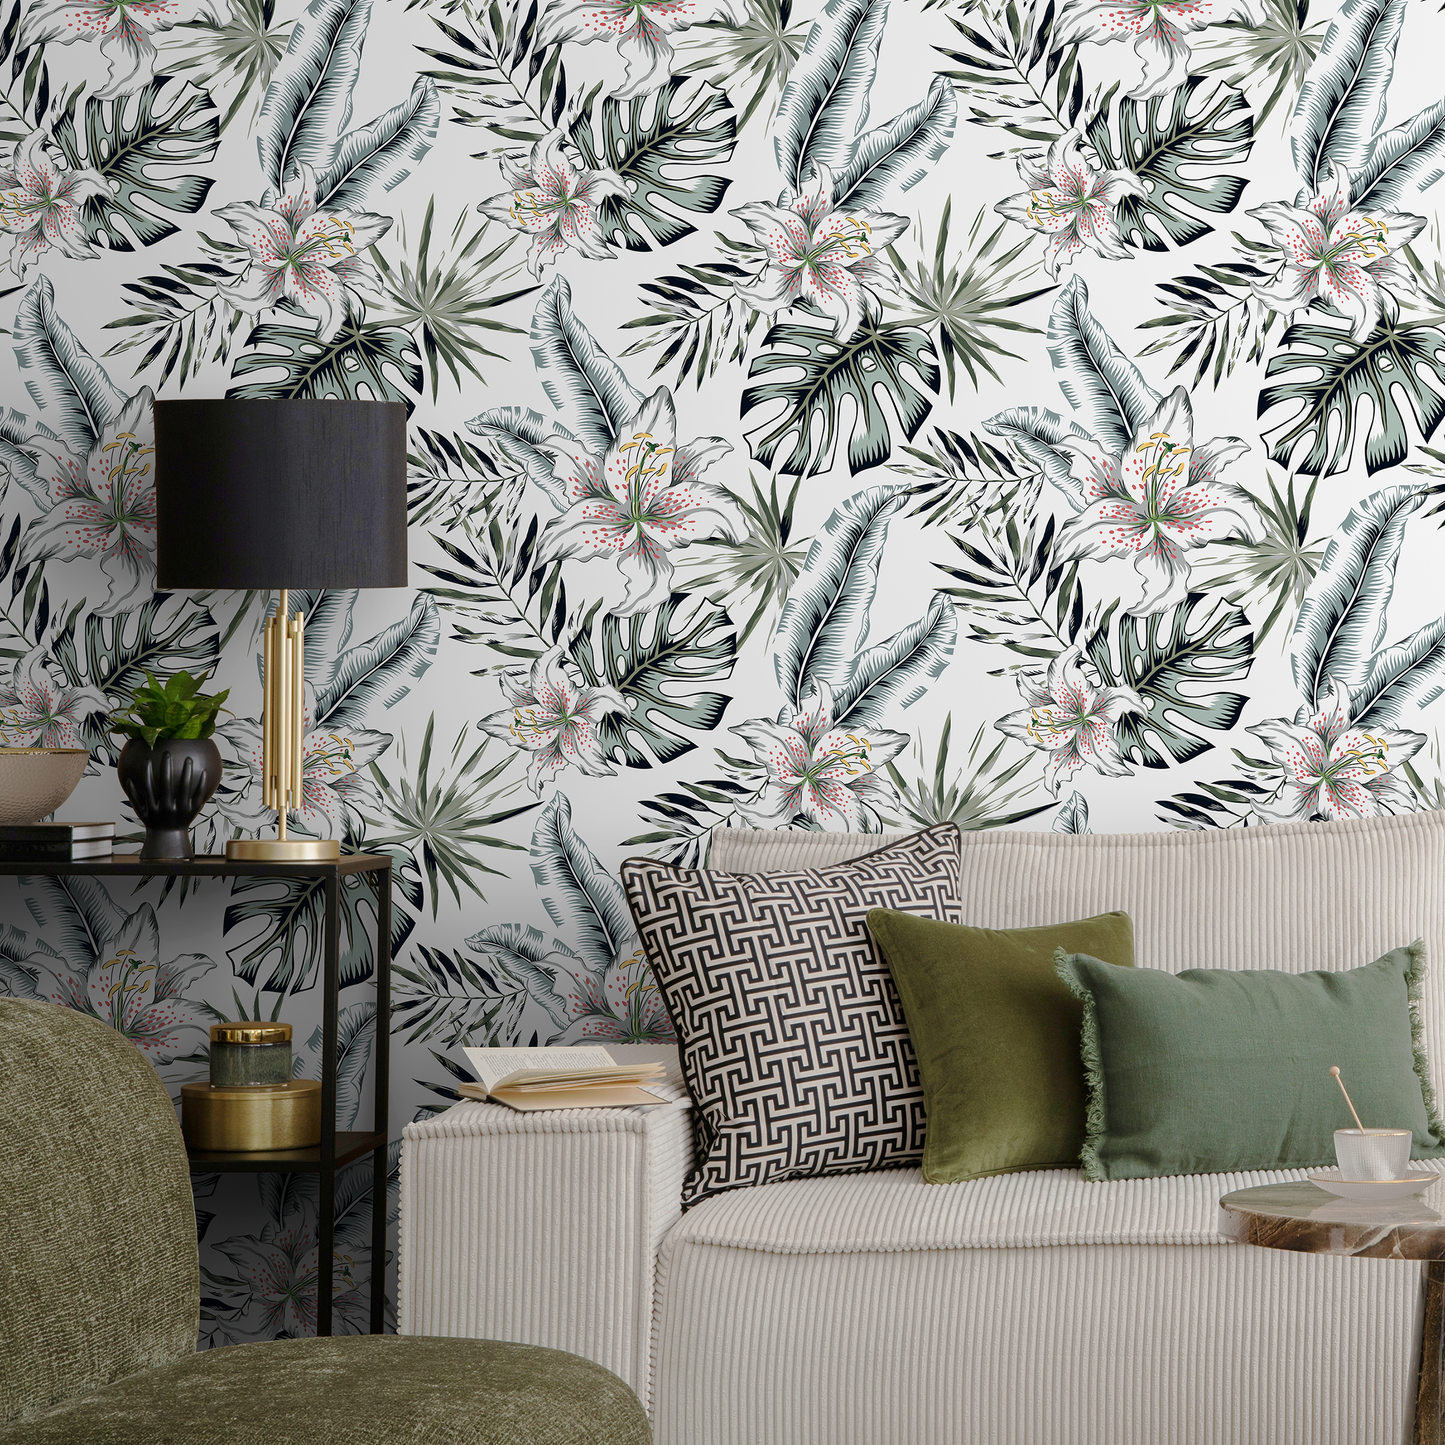 Removable Wallpaper Peel and Stick Wallpaper Wall Paper Wall Mural - Tropical Wallpaper - A478